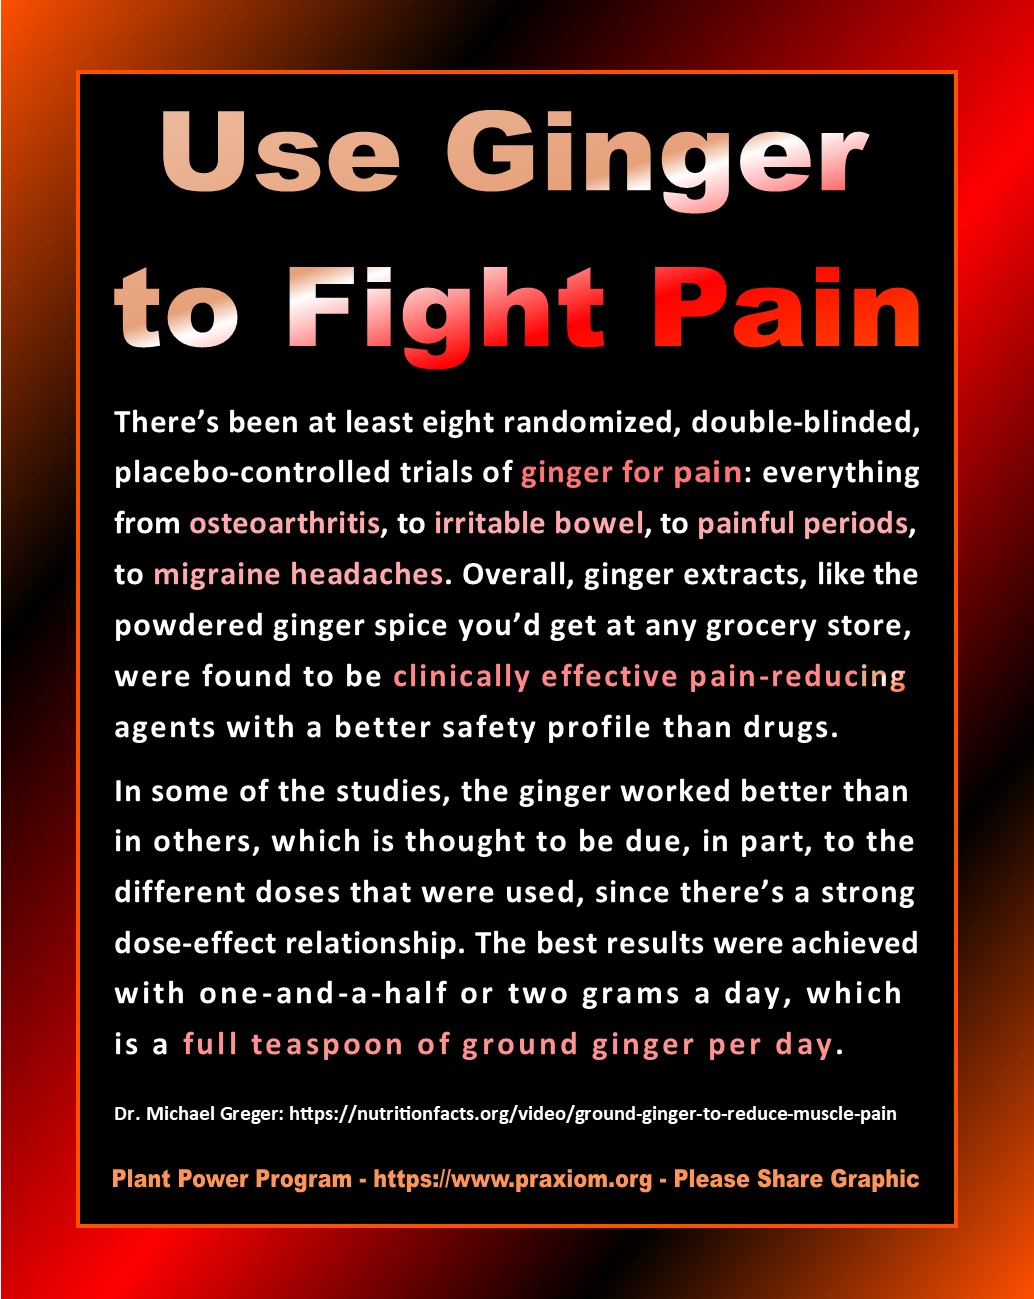 Use Ginger to Fight Pain - Dr. Michael Greger